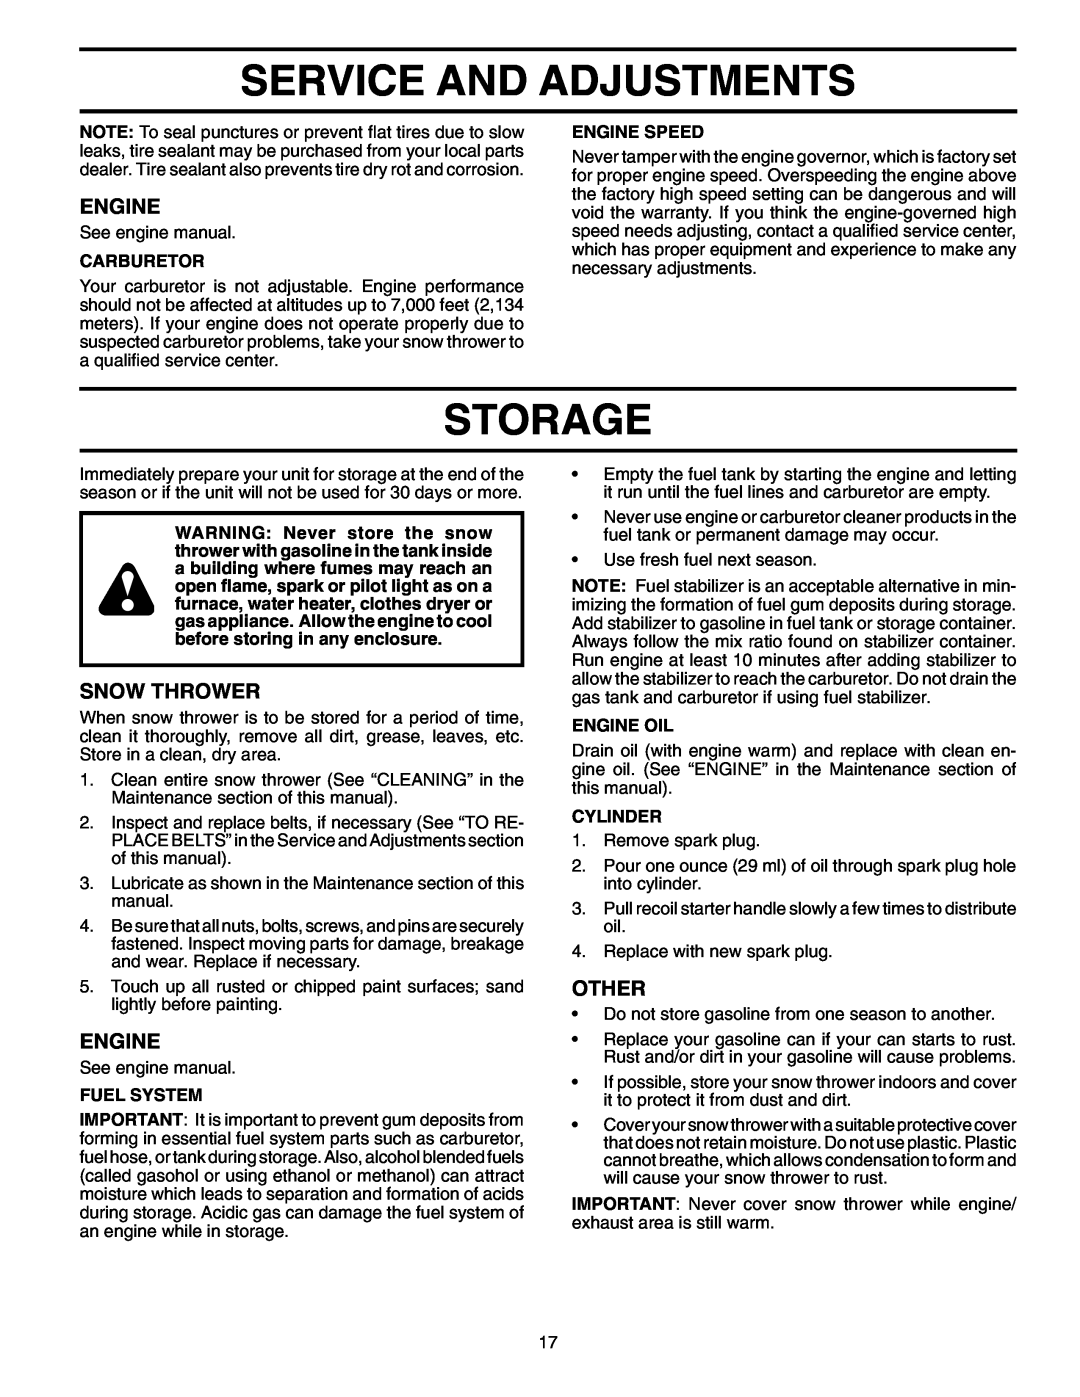 Poulan PO5524 Storage, Other, Service And Adjustments, Snow Thrower, Carburetor, Engine Speed, Fuel System, Engine Oil 